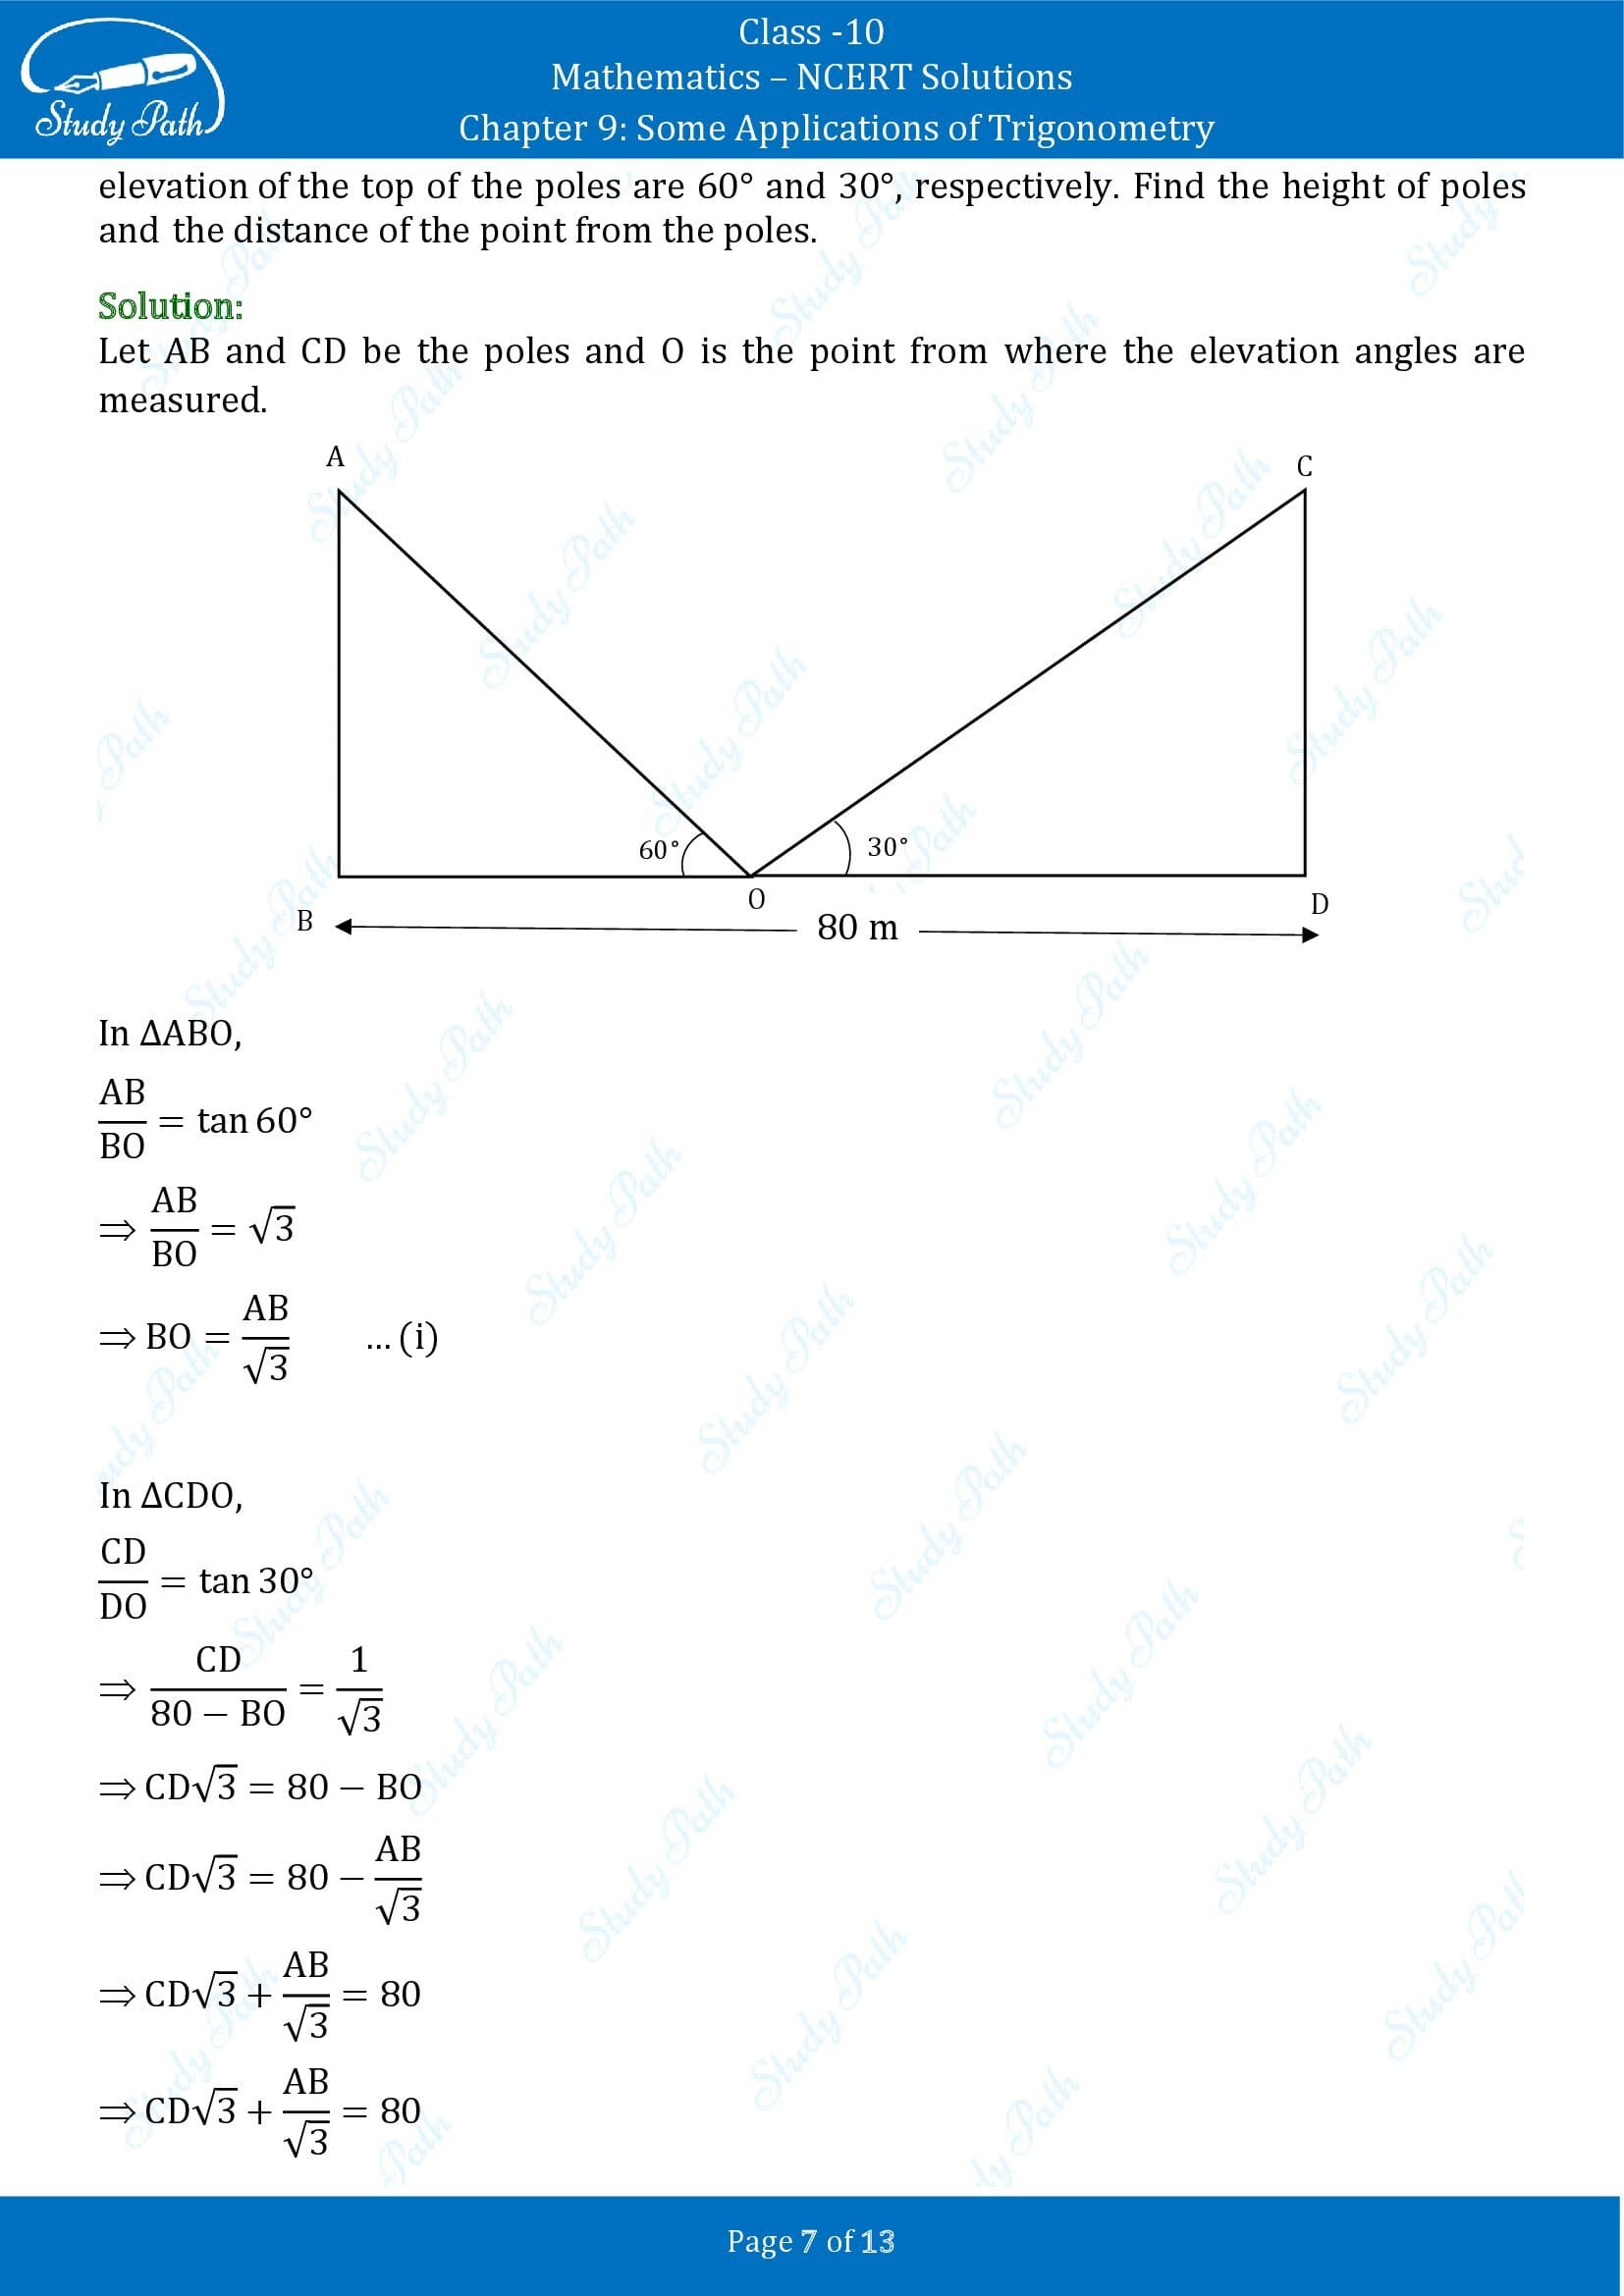 NCERT Solutions for Class 10 Maths Chapter 9 Some Applications of Trigonometry 00007